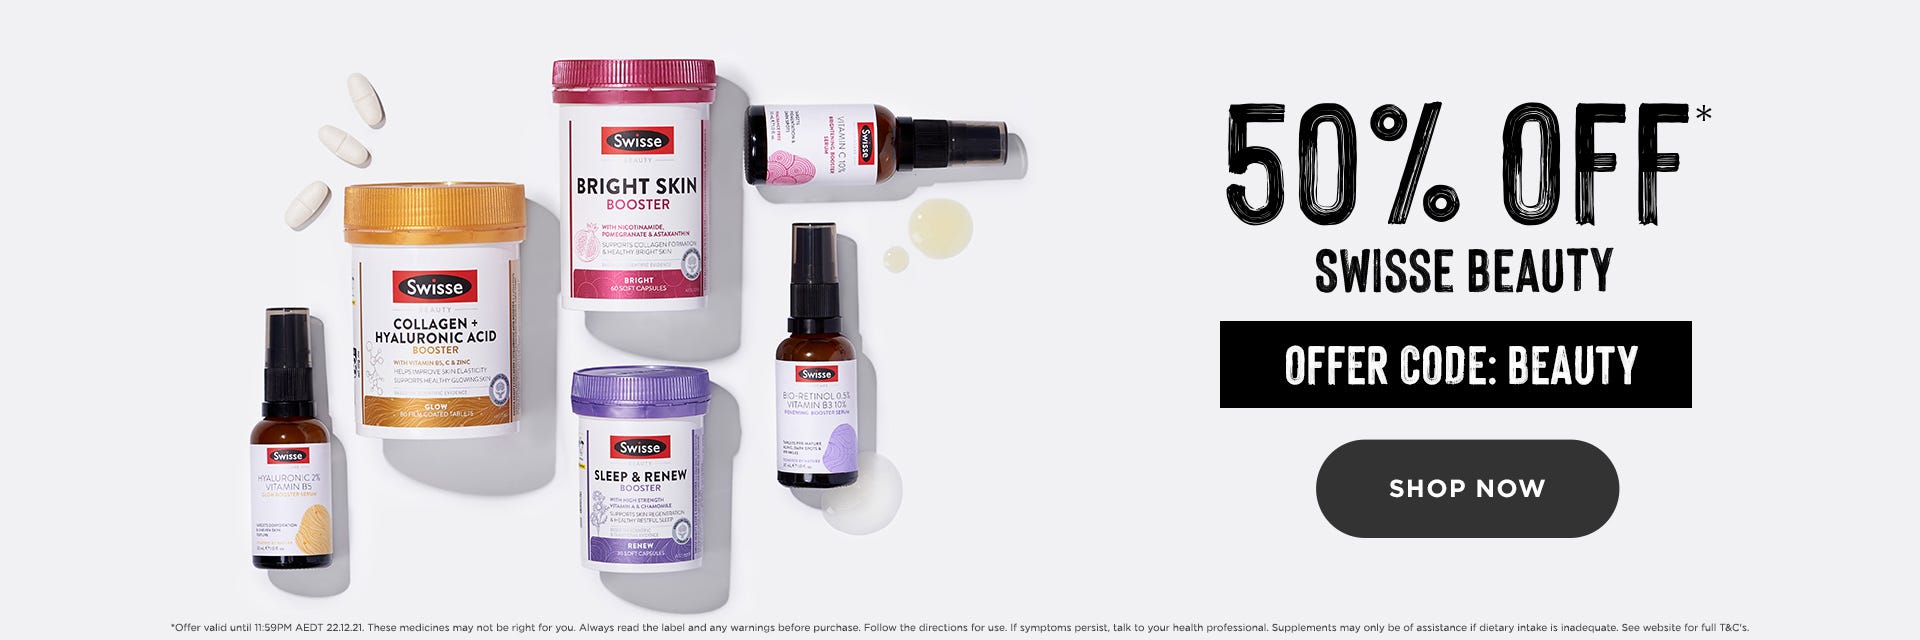 50% OFF on Swisse Beauty products with promo code